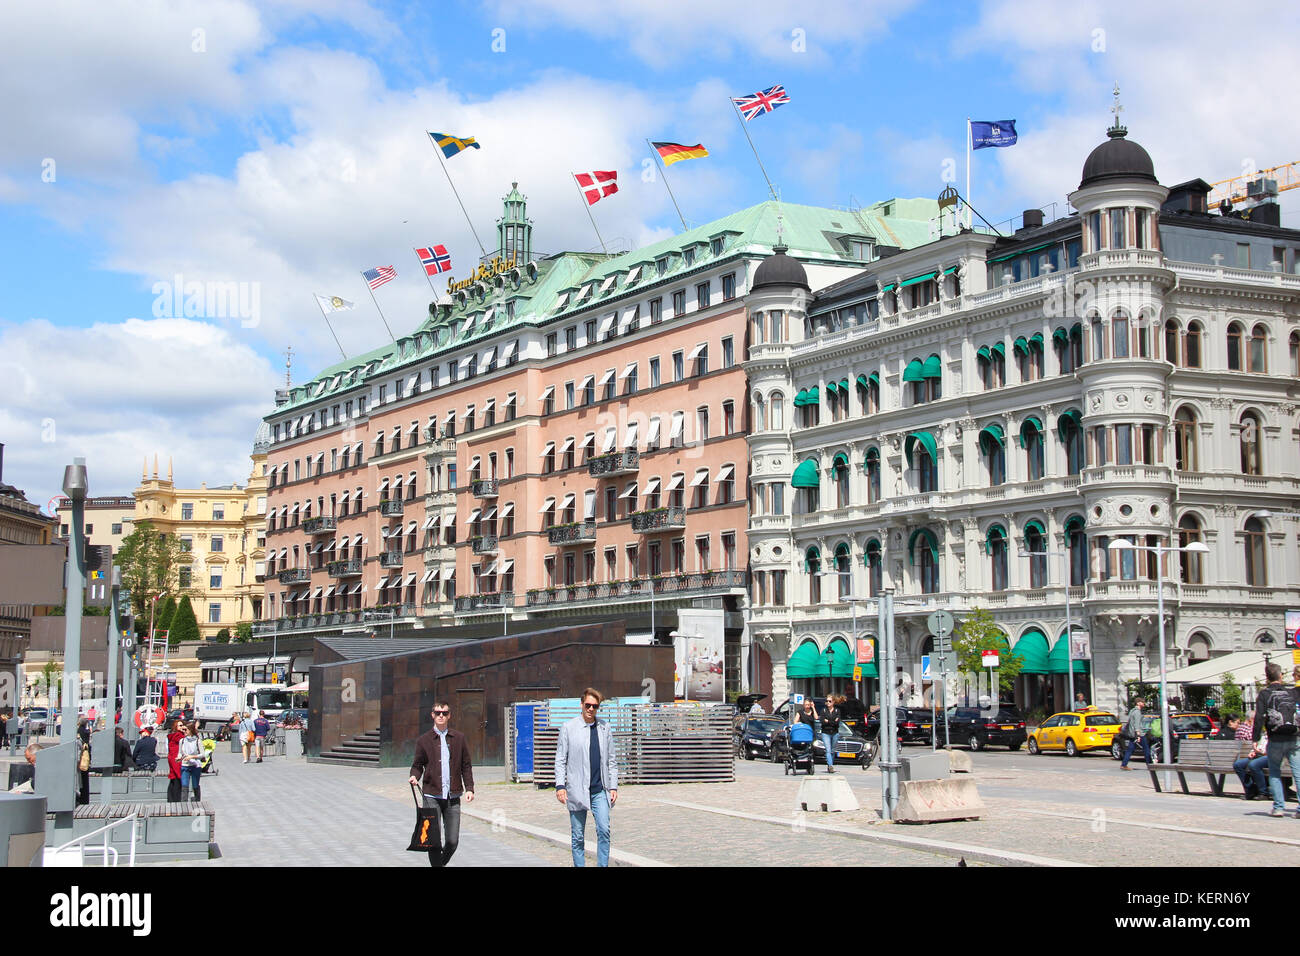 View to the building of the Grand Hotel Stockholm with flags of different countries (USA, Finland, Norway, Sweden, Denmark, Germany, Great Britain) Stock Photo